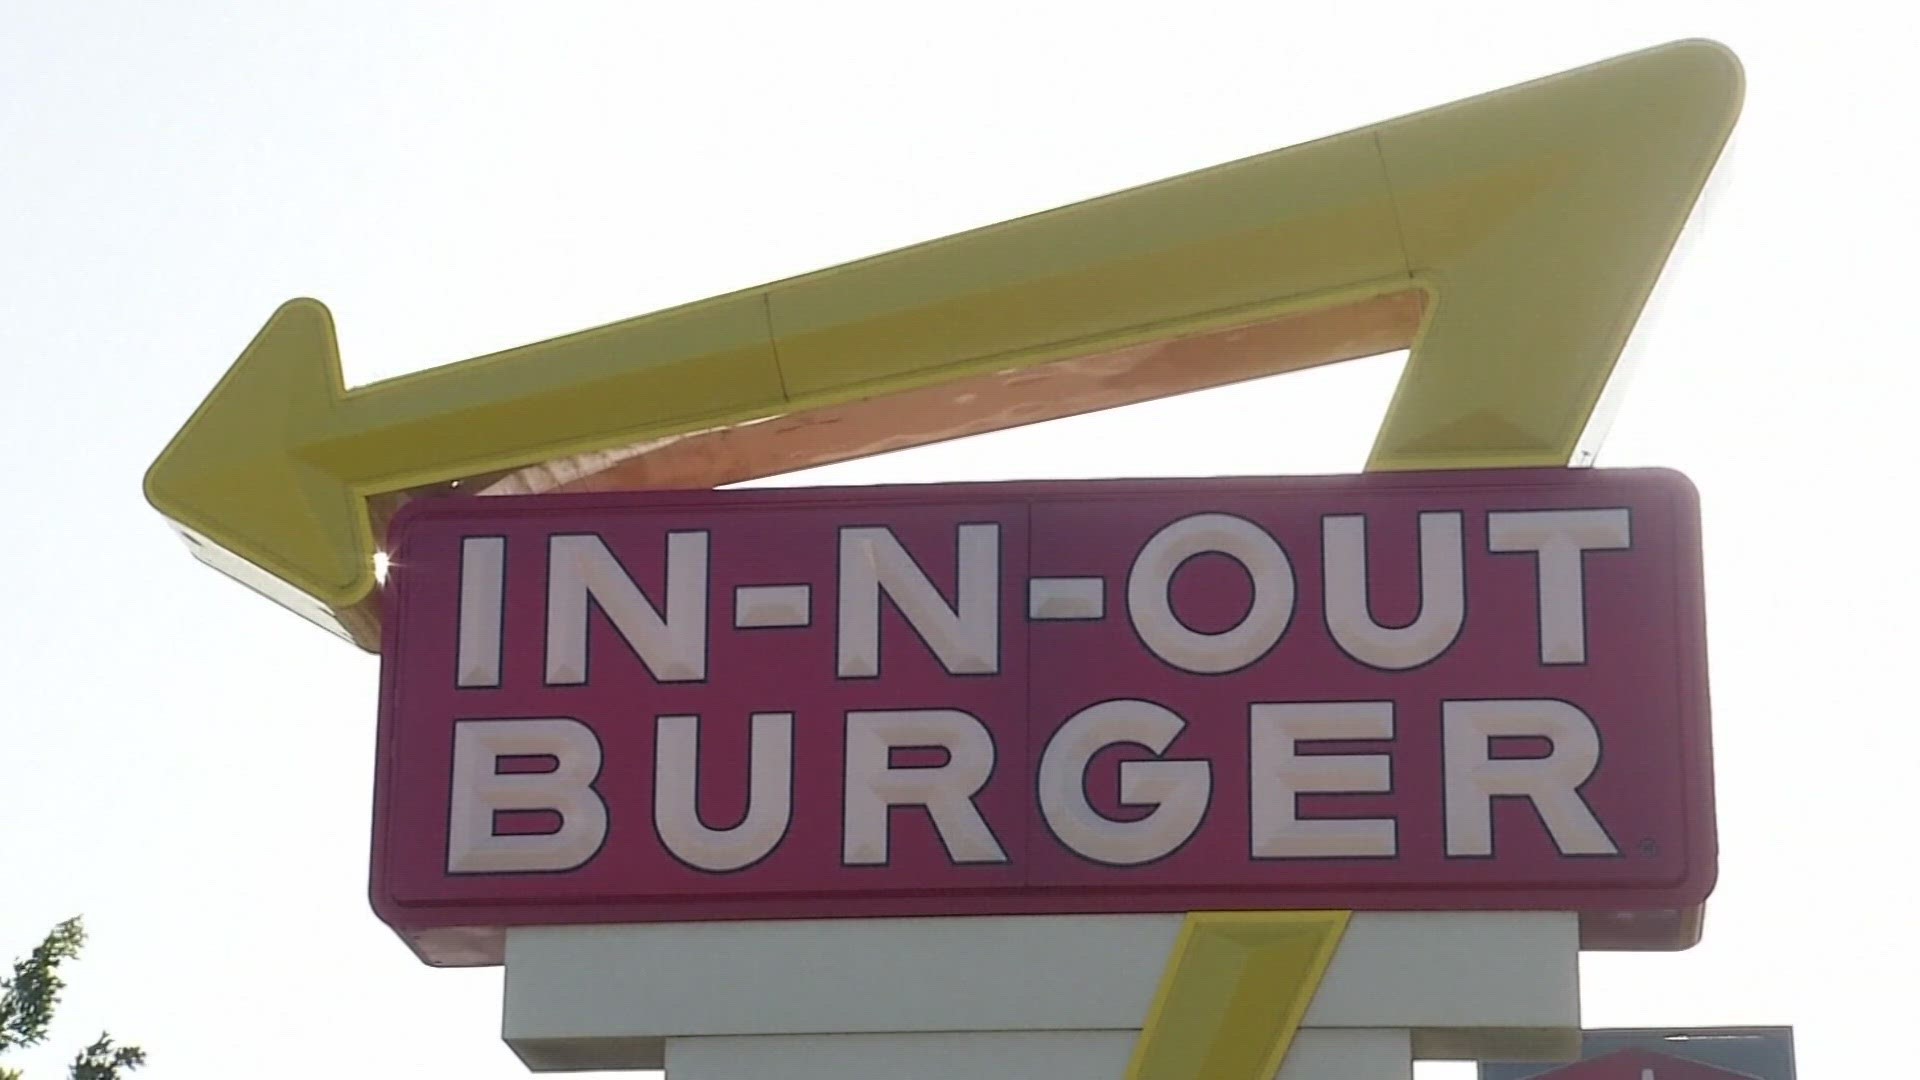 The Colorado city is expecting to see traffic impacts when the burger restaurant opens.